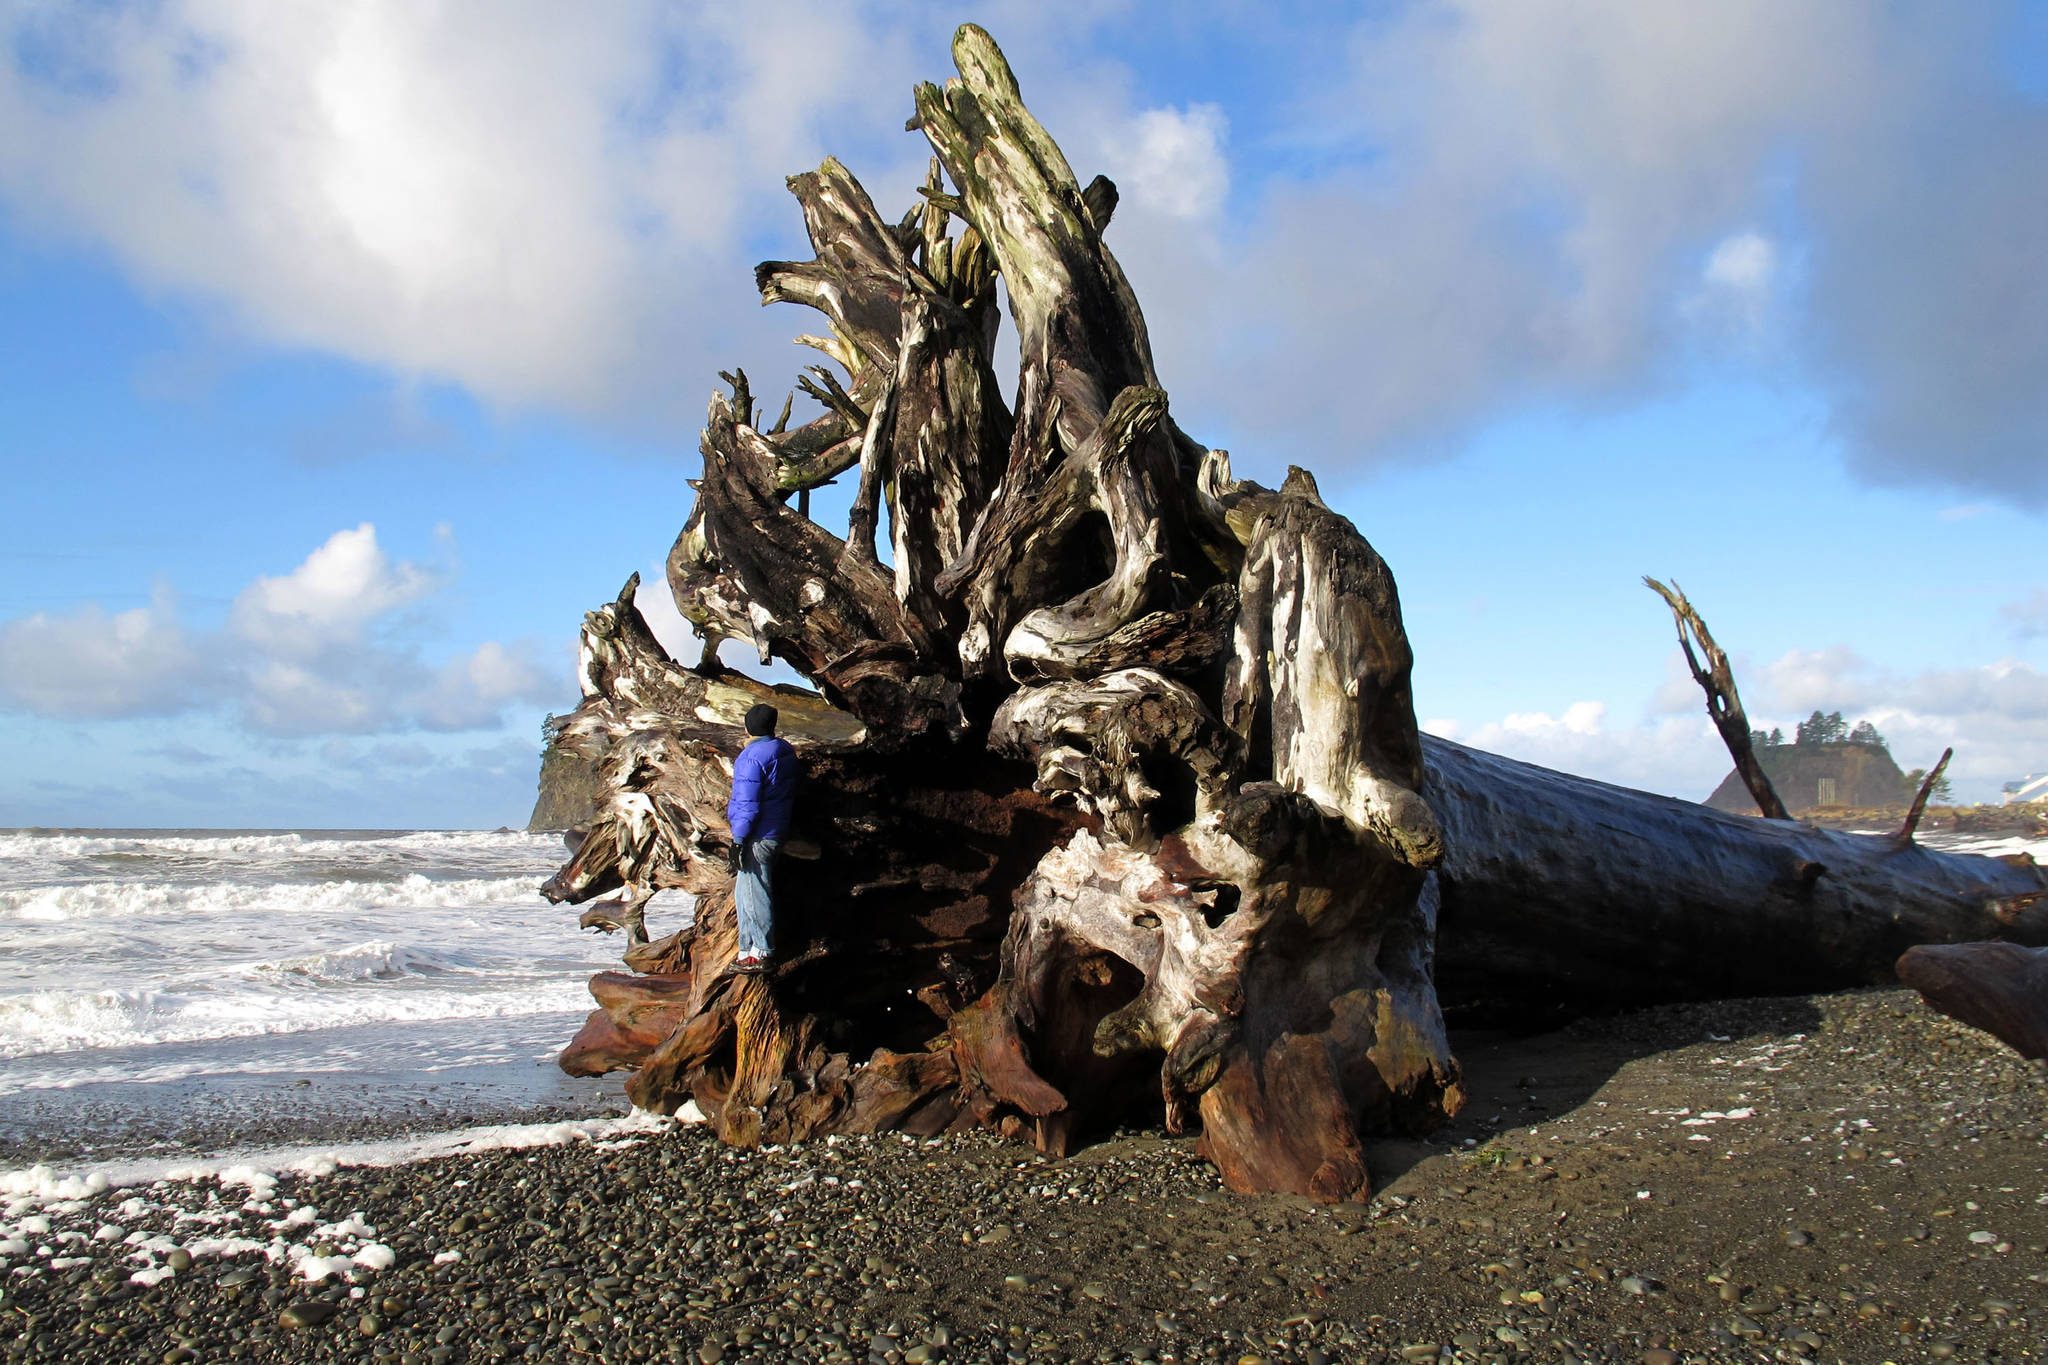 After a storm, the sun sometimes emerges at First Beach in La Push, on Washington's Olympic Peninsula, where a visitor clambers on massive driftwood. Kristin Jackson | Seattle Times